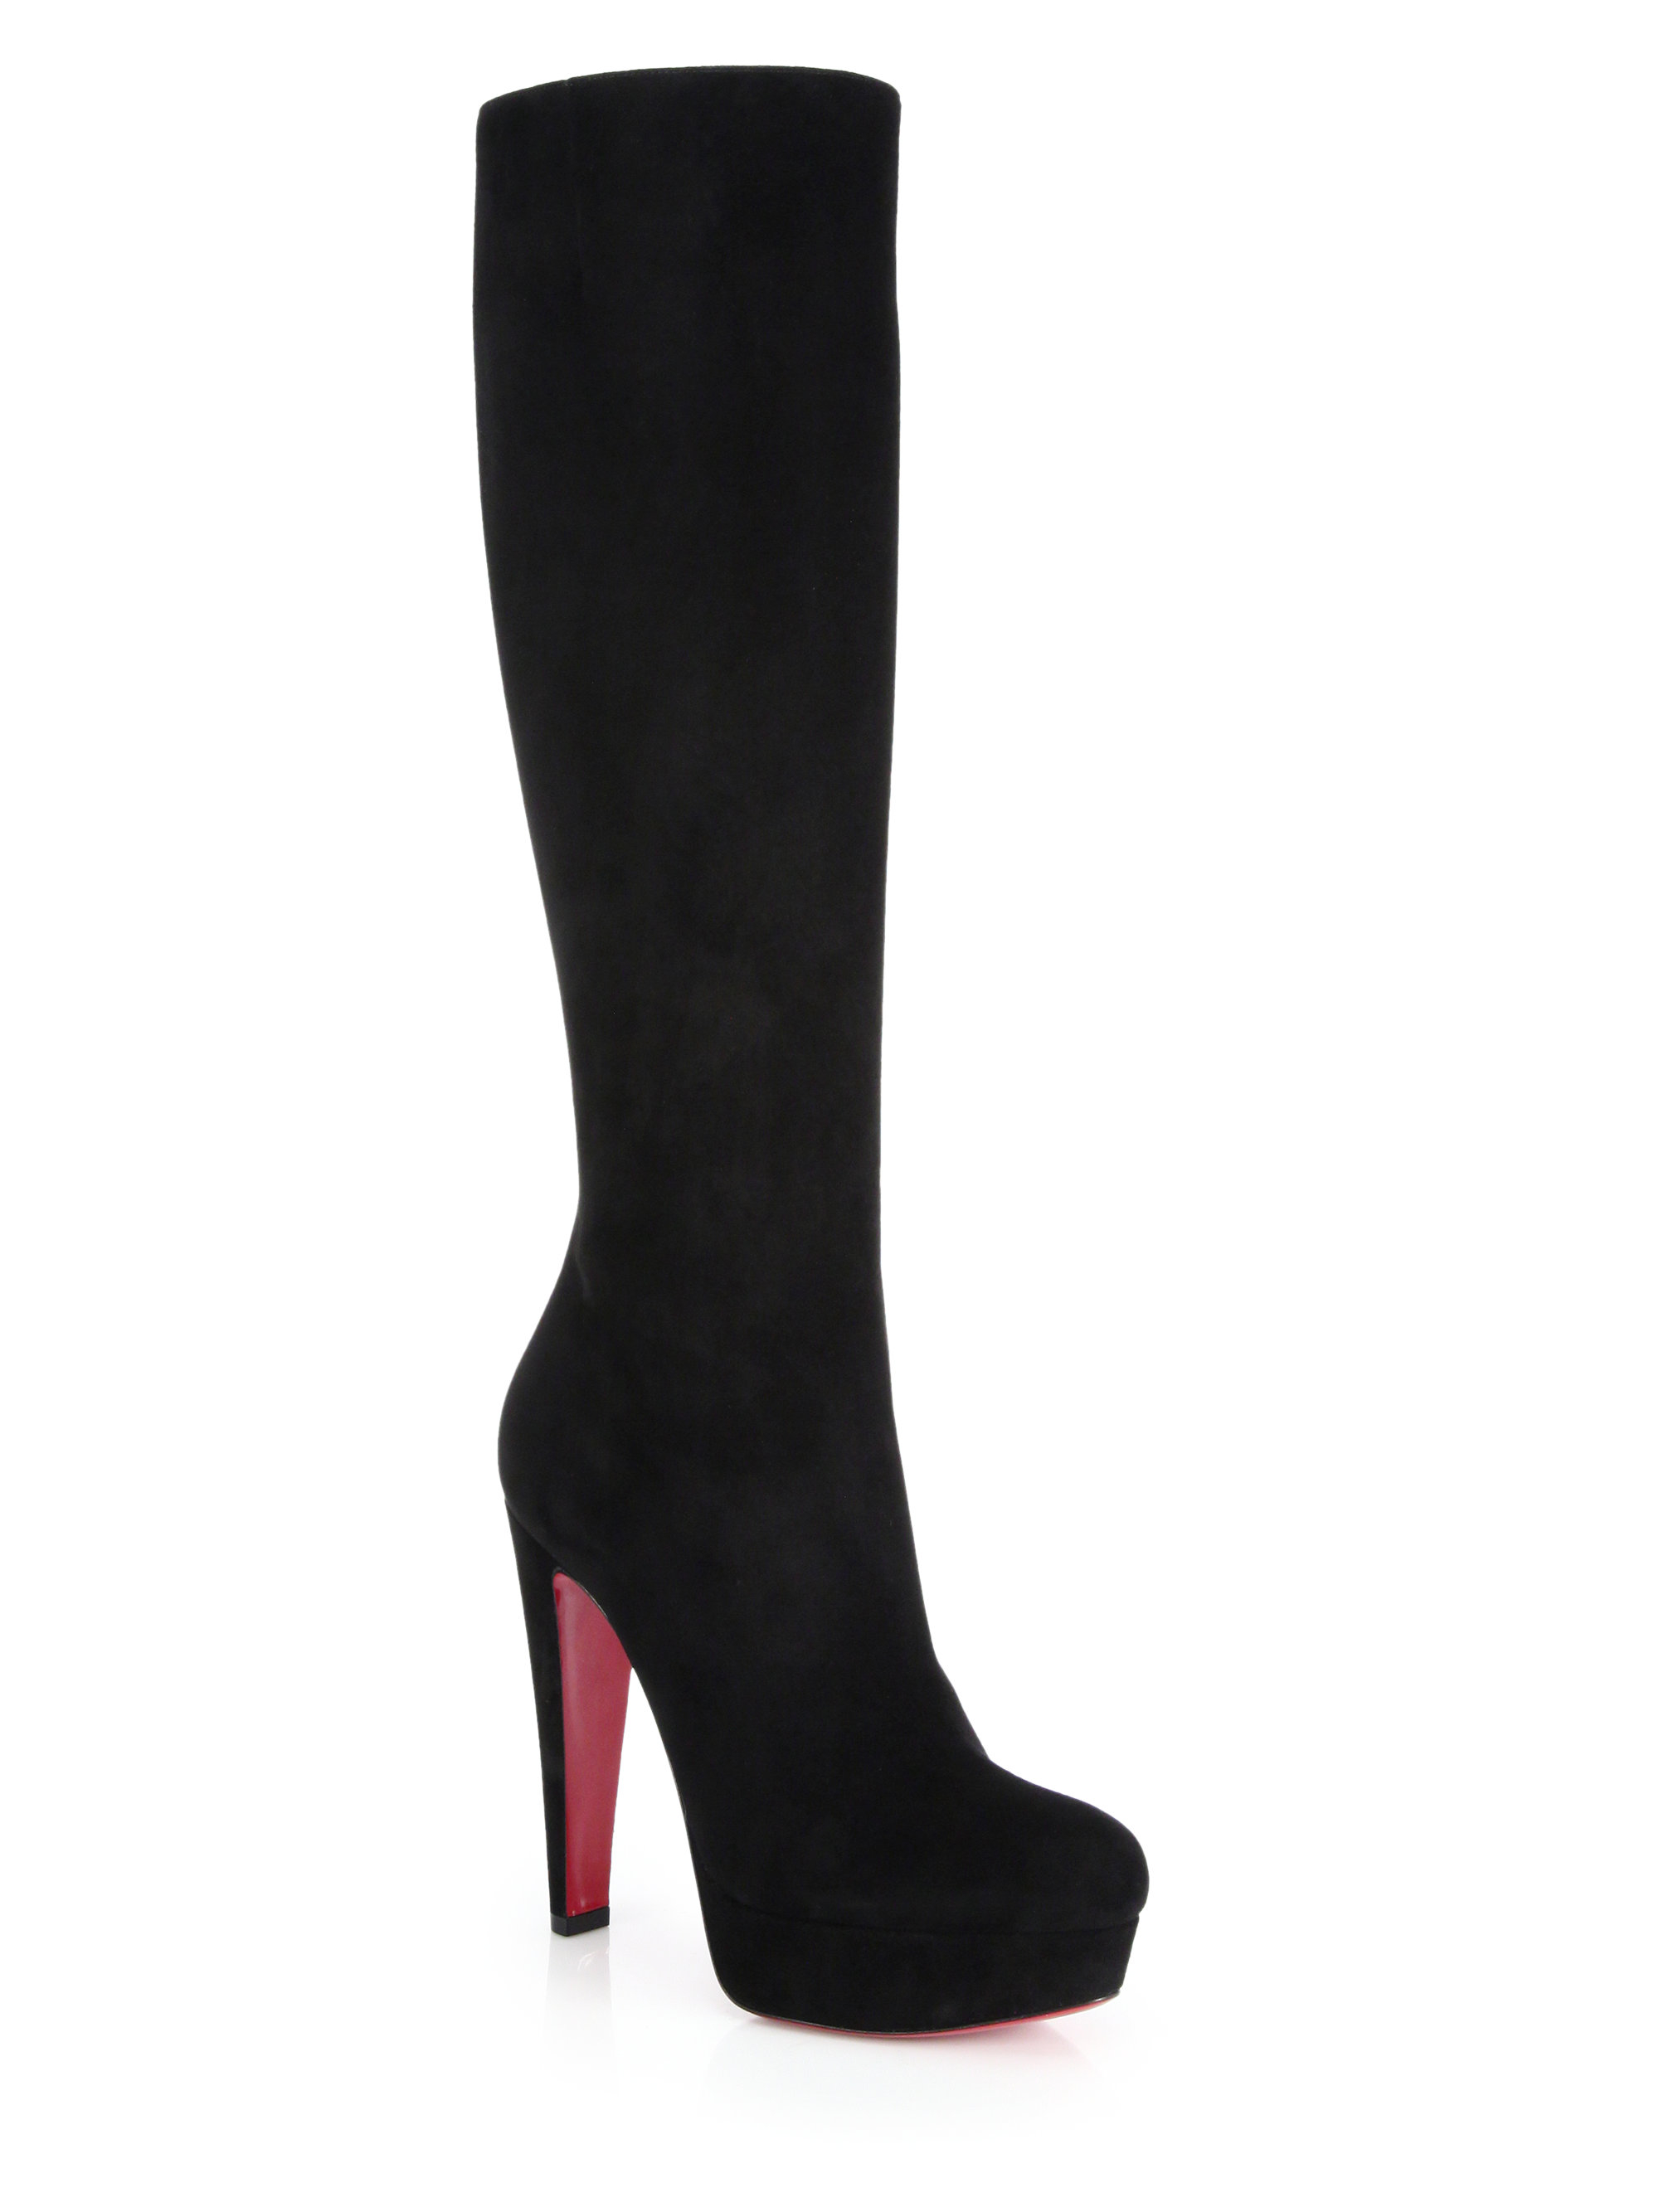 timeren Tulipaner Jonglere Christian Louboutin Lady Suede Knee-high Platform Boots in Black | Lyst